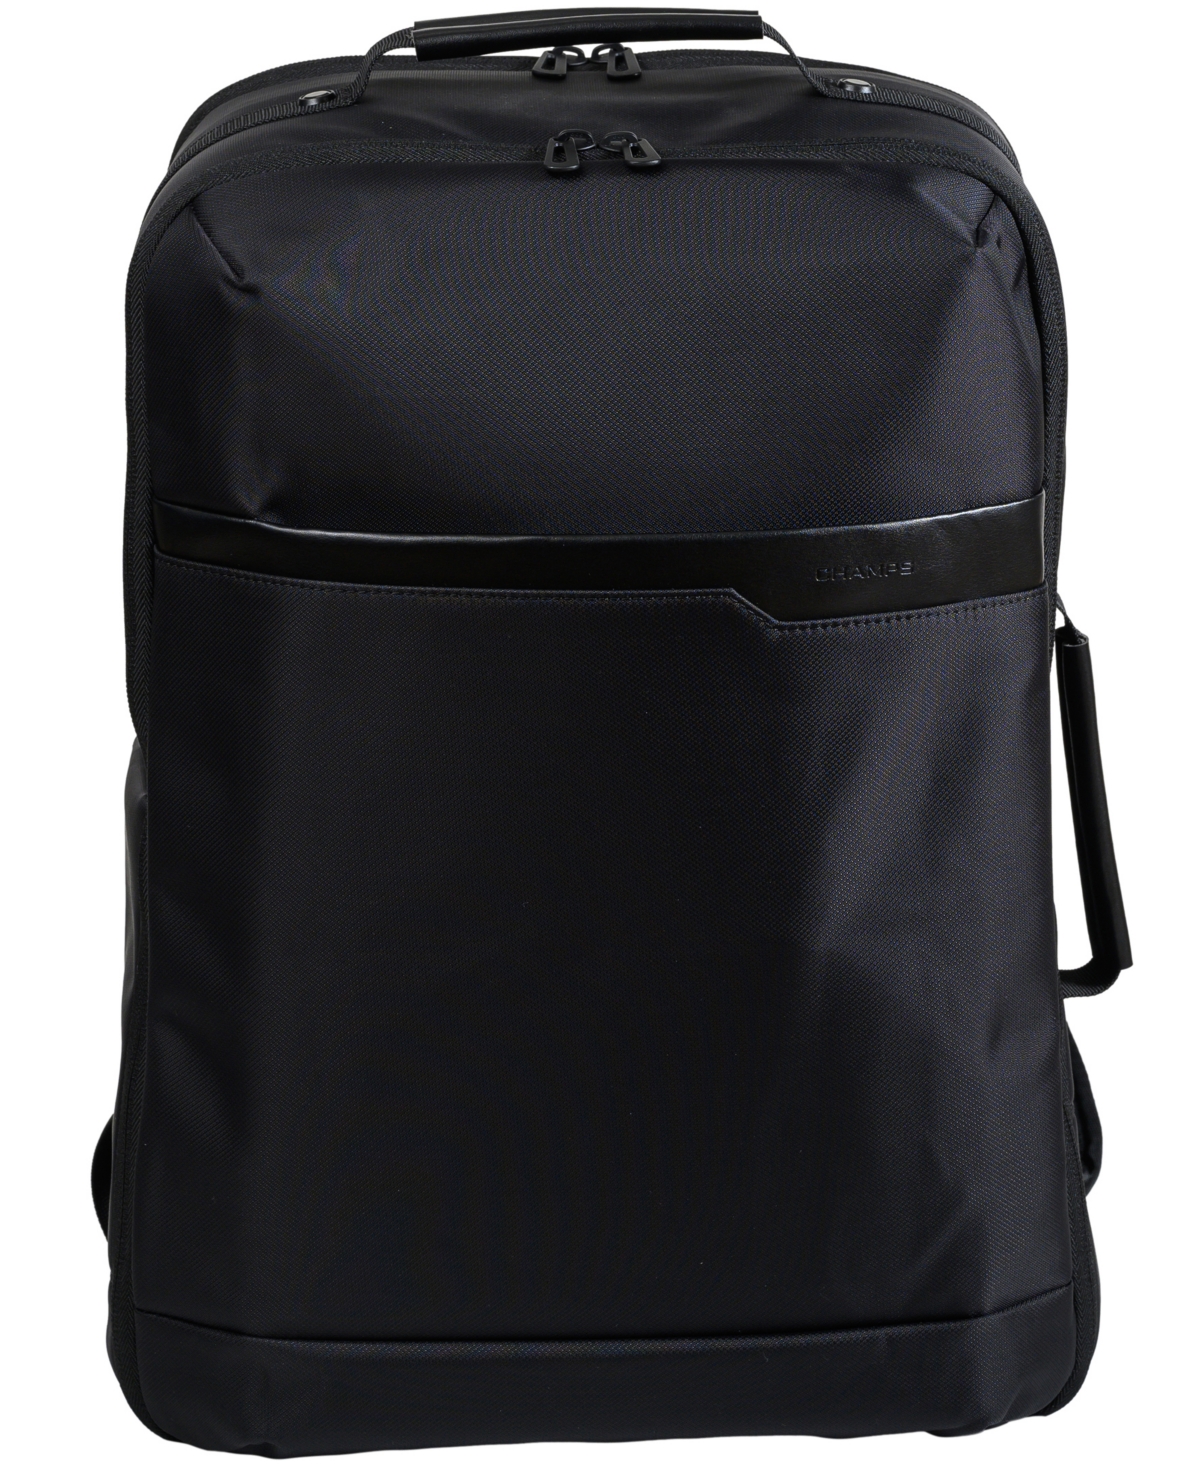 Onyx Collection - Travel Backpack with Usb Port - Black